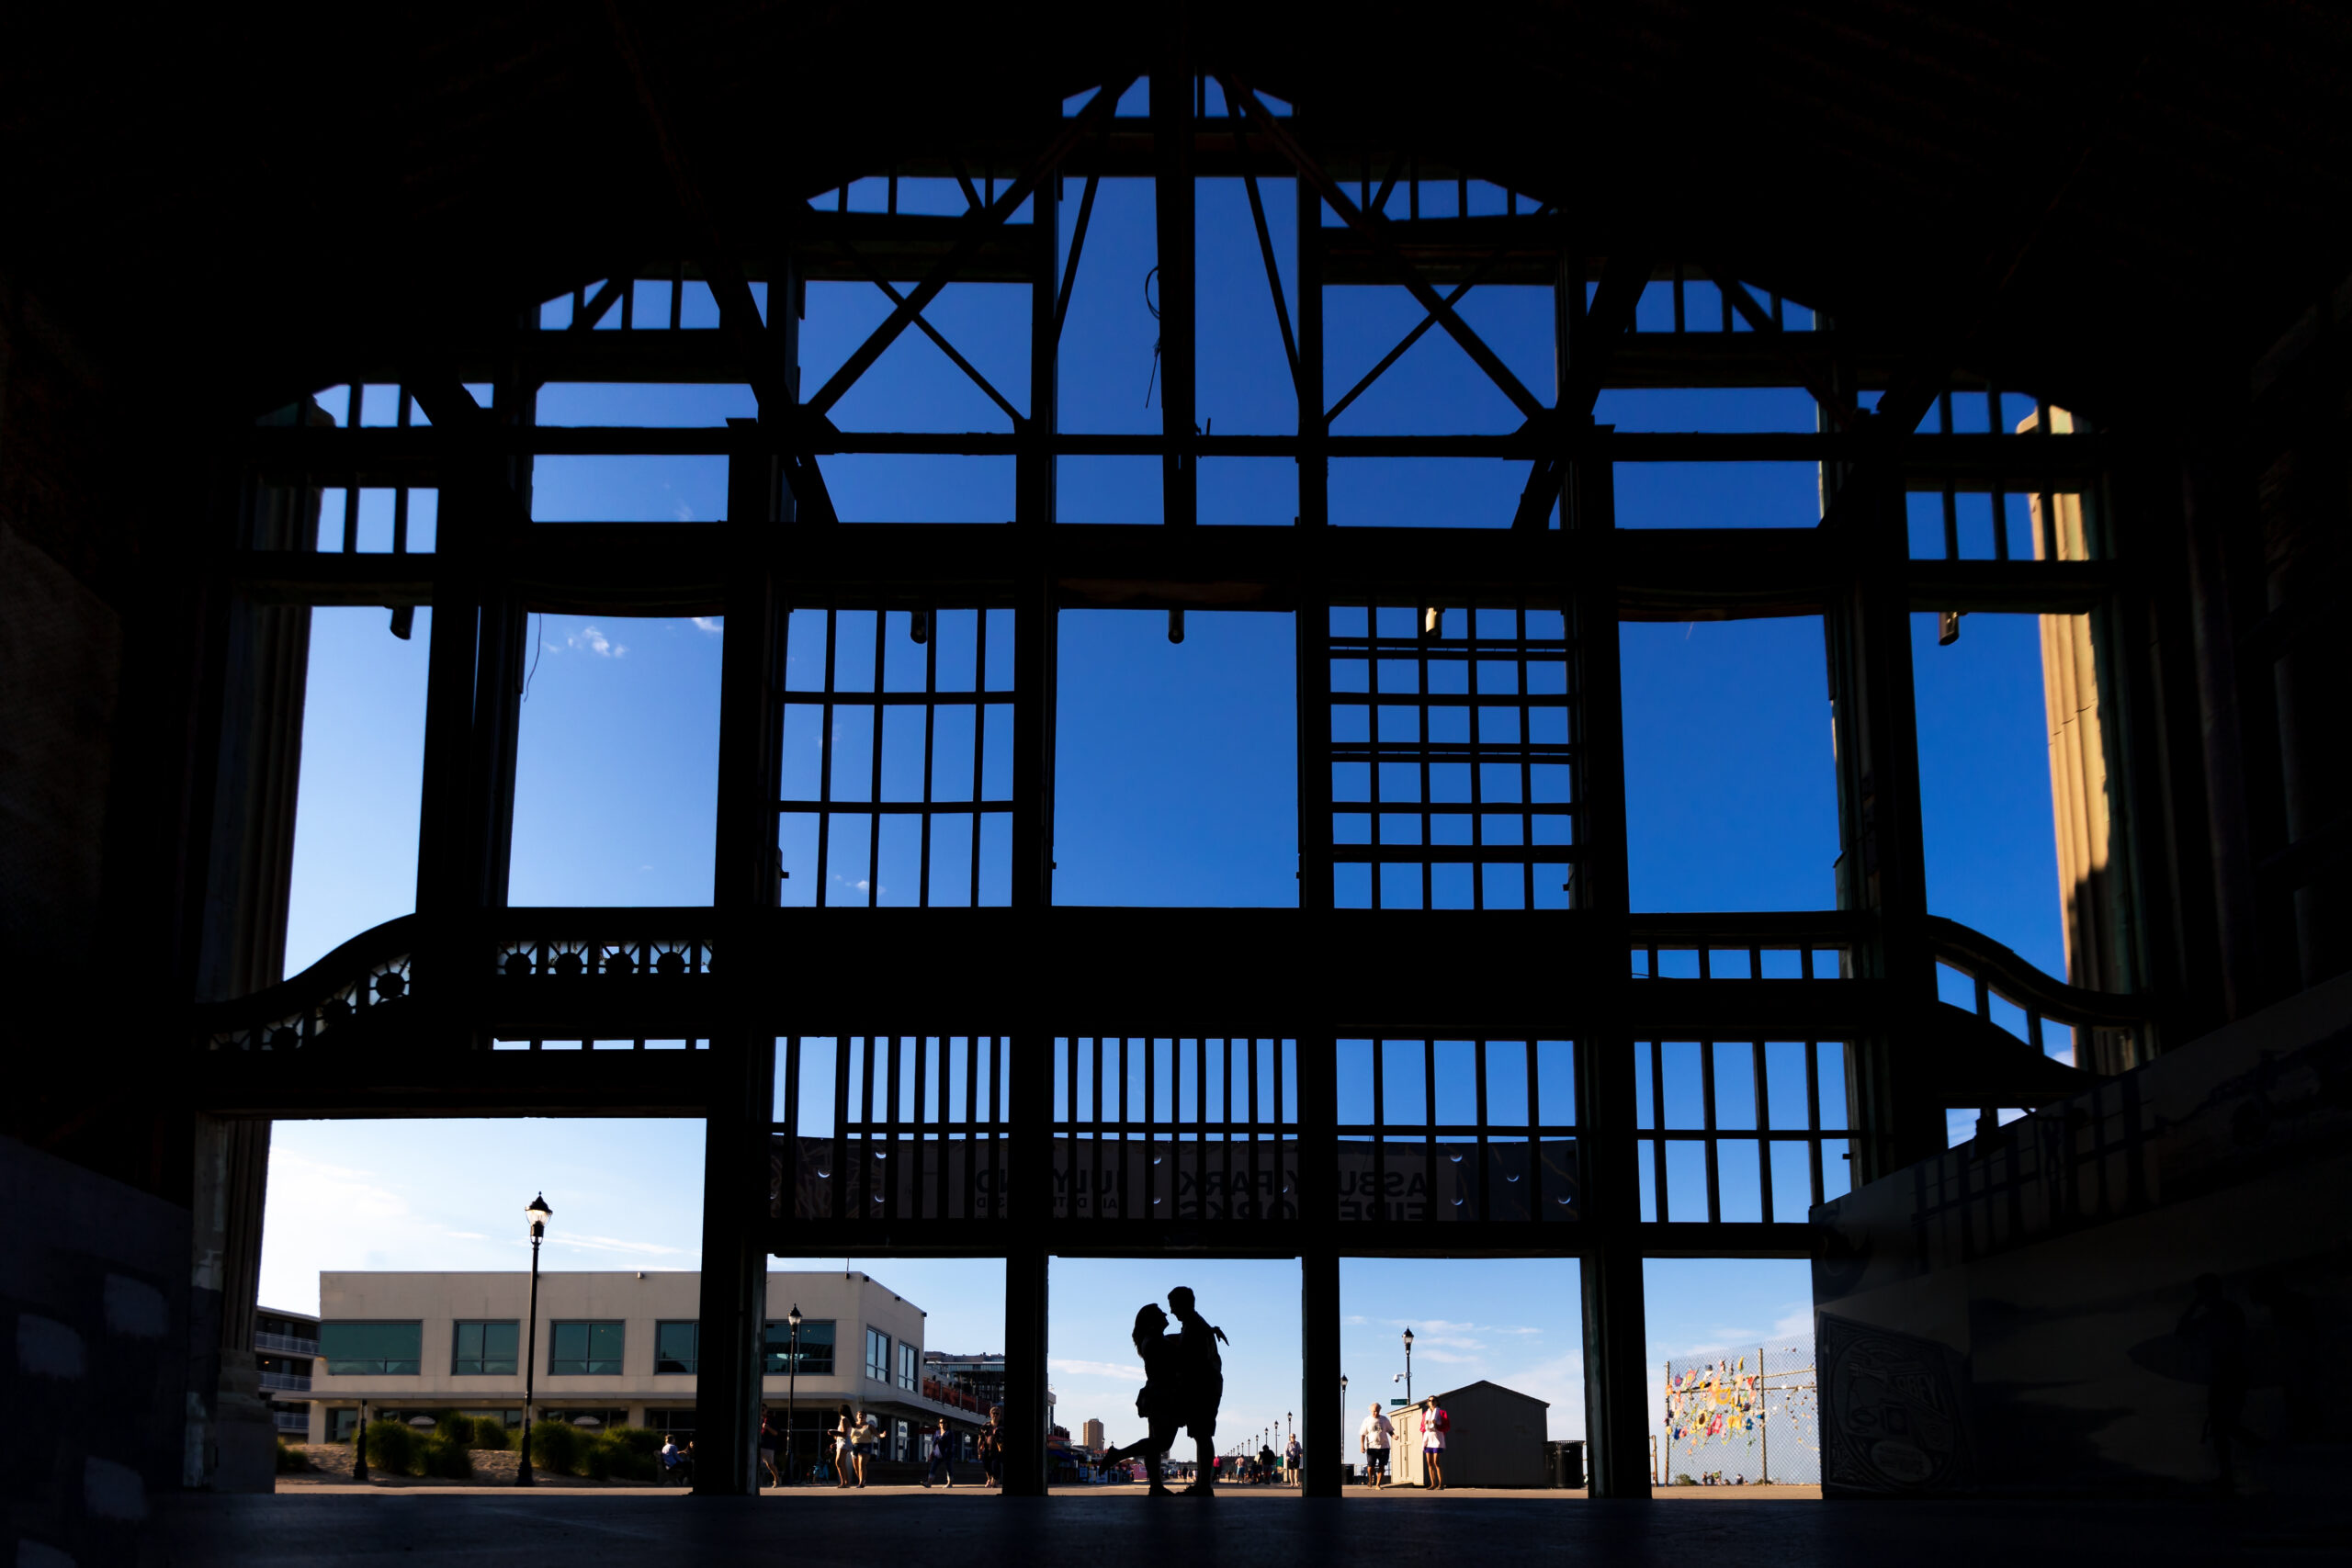 A stunning silhouette of an engagement session couple on the boardwalk of Asbury Park, inside the historic Casino building. The beautifully captured moment, taken by Jarot Bocanegra Photography, radiates a sense of timeless romance